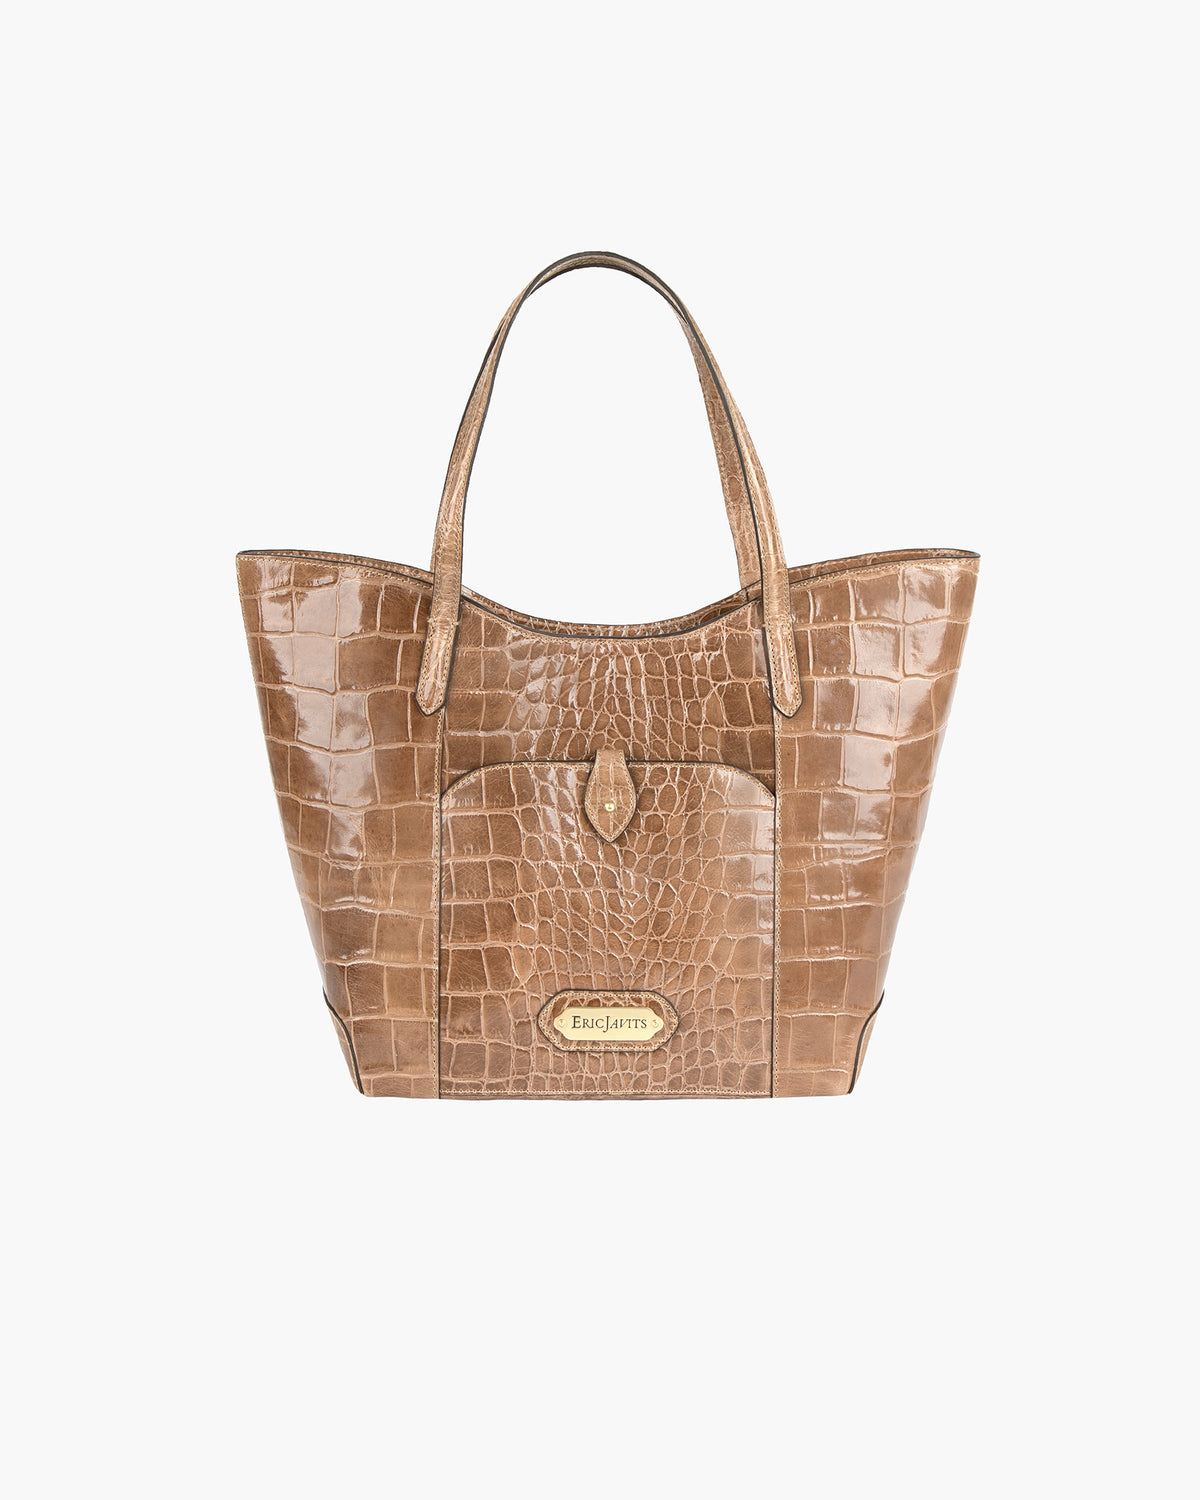 Brahmin Handbags - The tote bag that fits it all. What are you